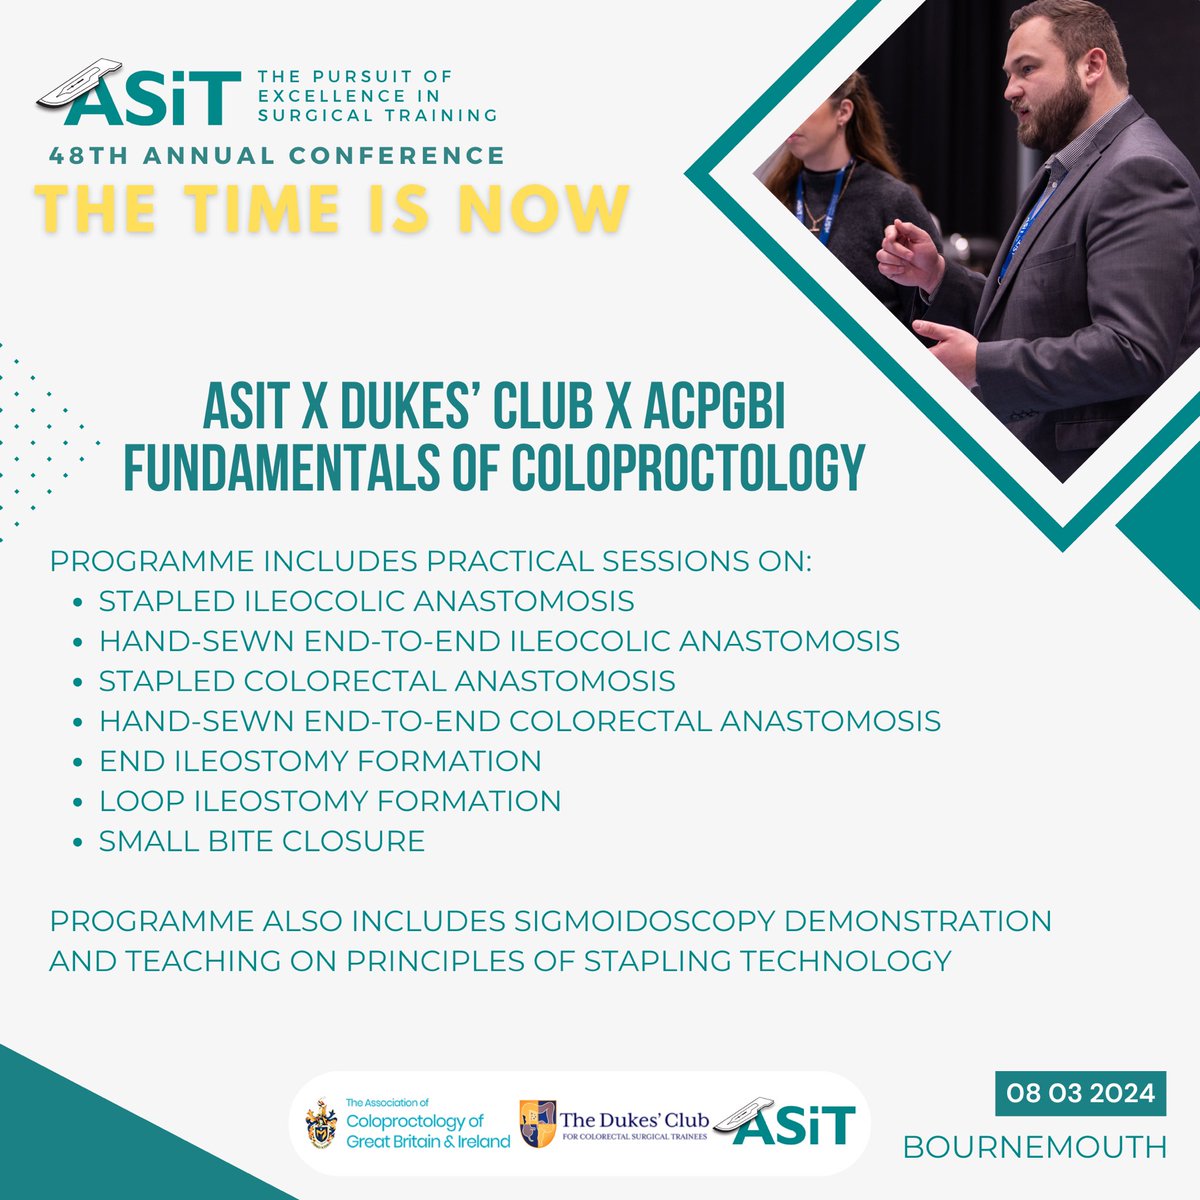 Promised to be a full-day hands-on course, you’ll be taught key skills in such as ileocolic and colorectal #anastomoses and #ileostomies 📅 8th March 2024 ⭐️ Exclusive for ASiT2024 delegates 🎟 Tickets still available 🔗 tinyurl.com/ASiT24Rg #TheTimeIsNow 🧵 2/3